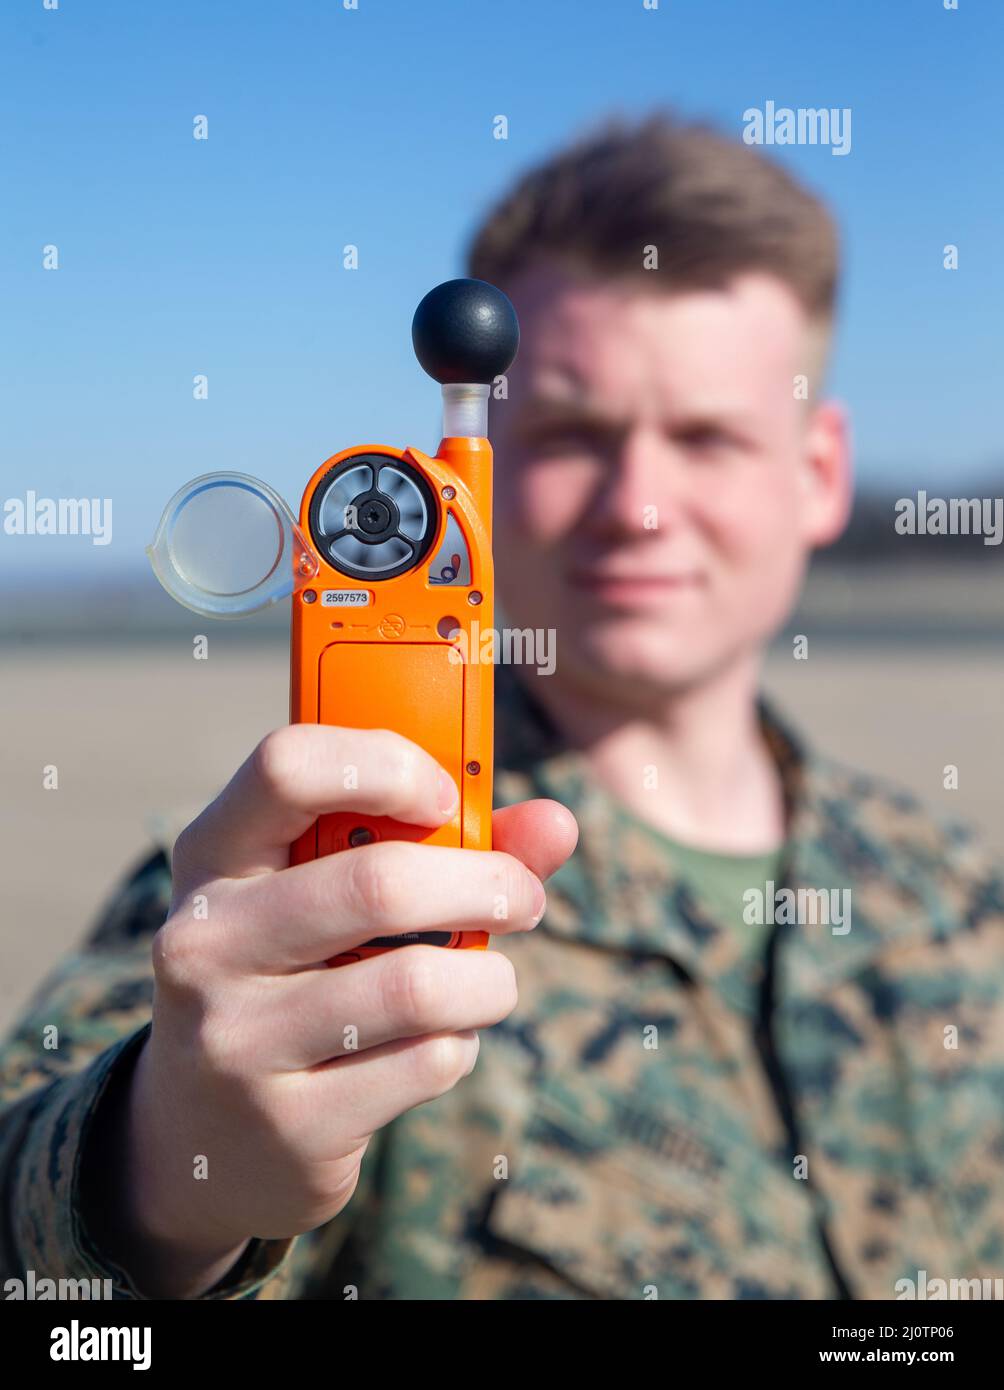 U.S. Marine Corps Lance Cpl. Chandler A. Hodge, a meteorology and oceanography (METOC) analyst forecaster with Marine Corps Air Facilities Quantico, reads information off a kestrel weather meter at Marine Corps Base Quantico, Virginia, Jan. 26, 2022. This device reads the wet bulb globe temperature, pressure, and humidity, and is used in tactical situations, or when the weather conditions need to be known on the spot. (US Marine Corps photo by Lance Cpl. Kayla LaMar) Stock Photo